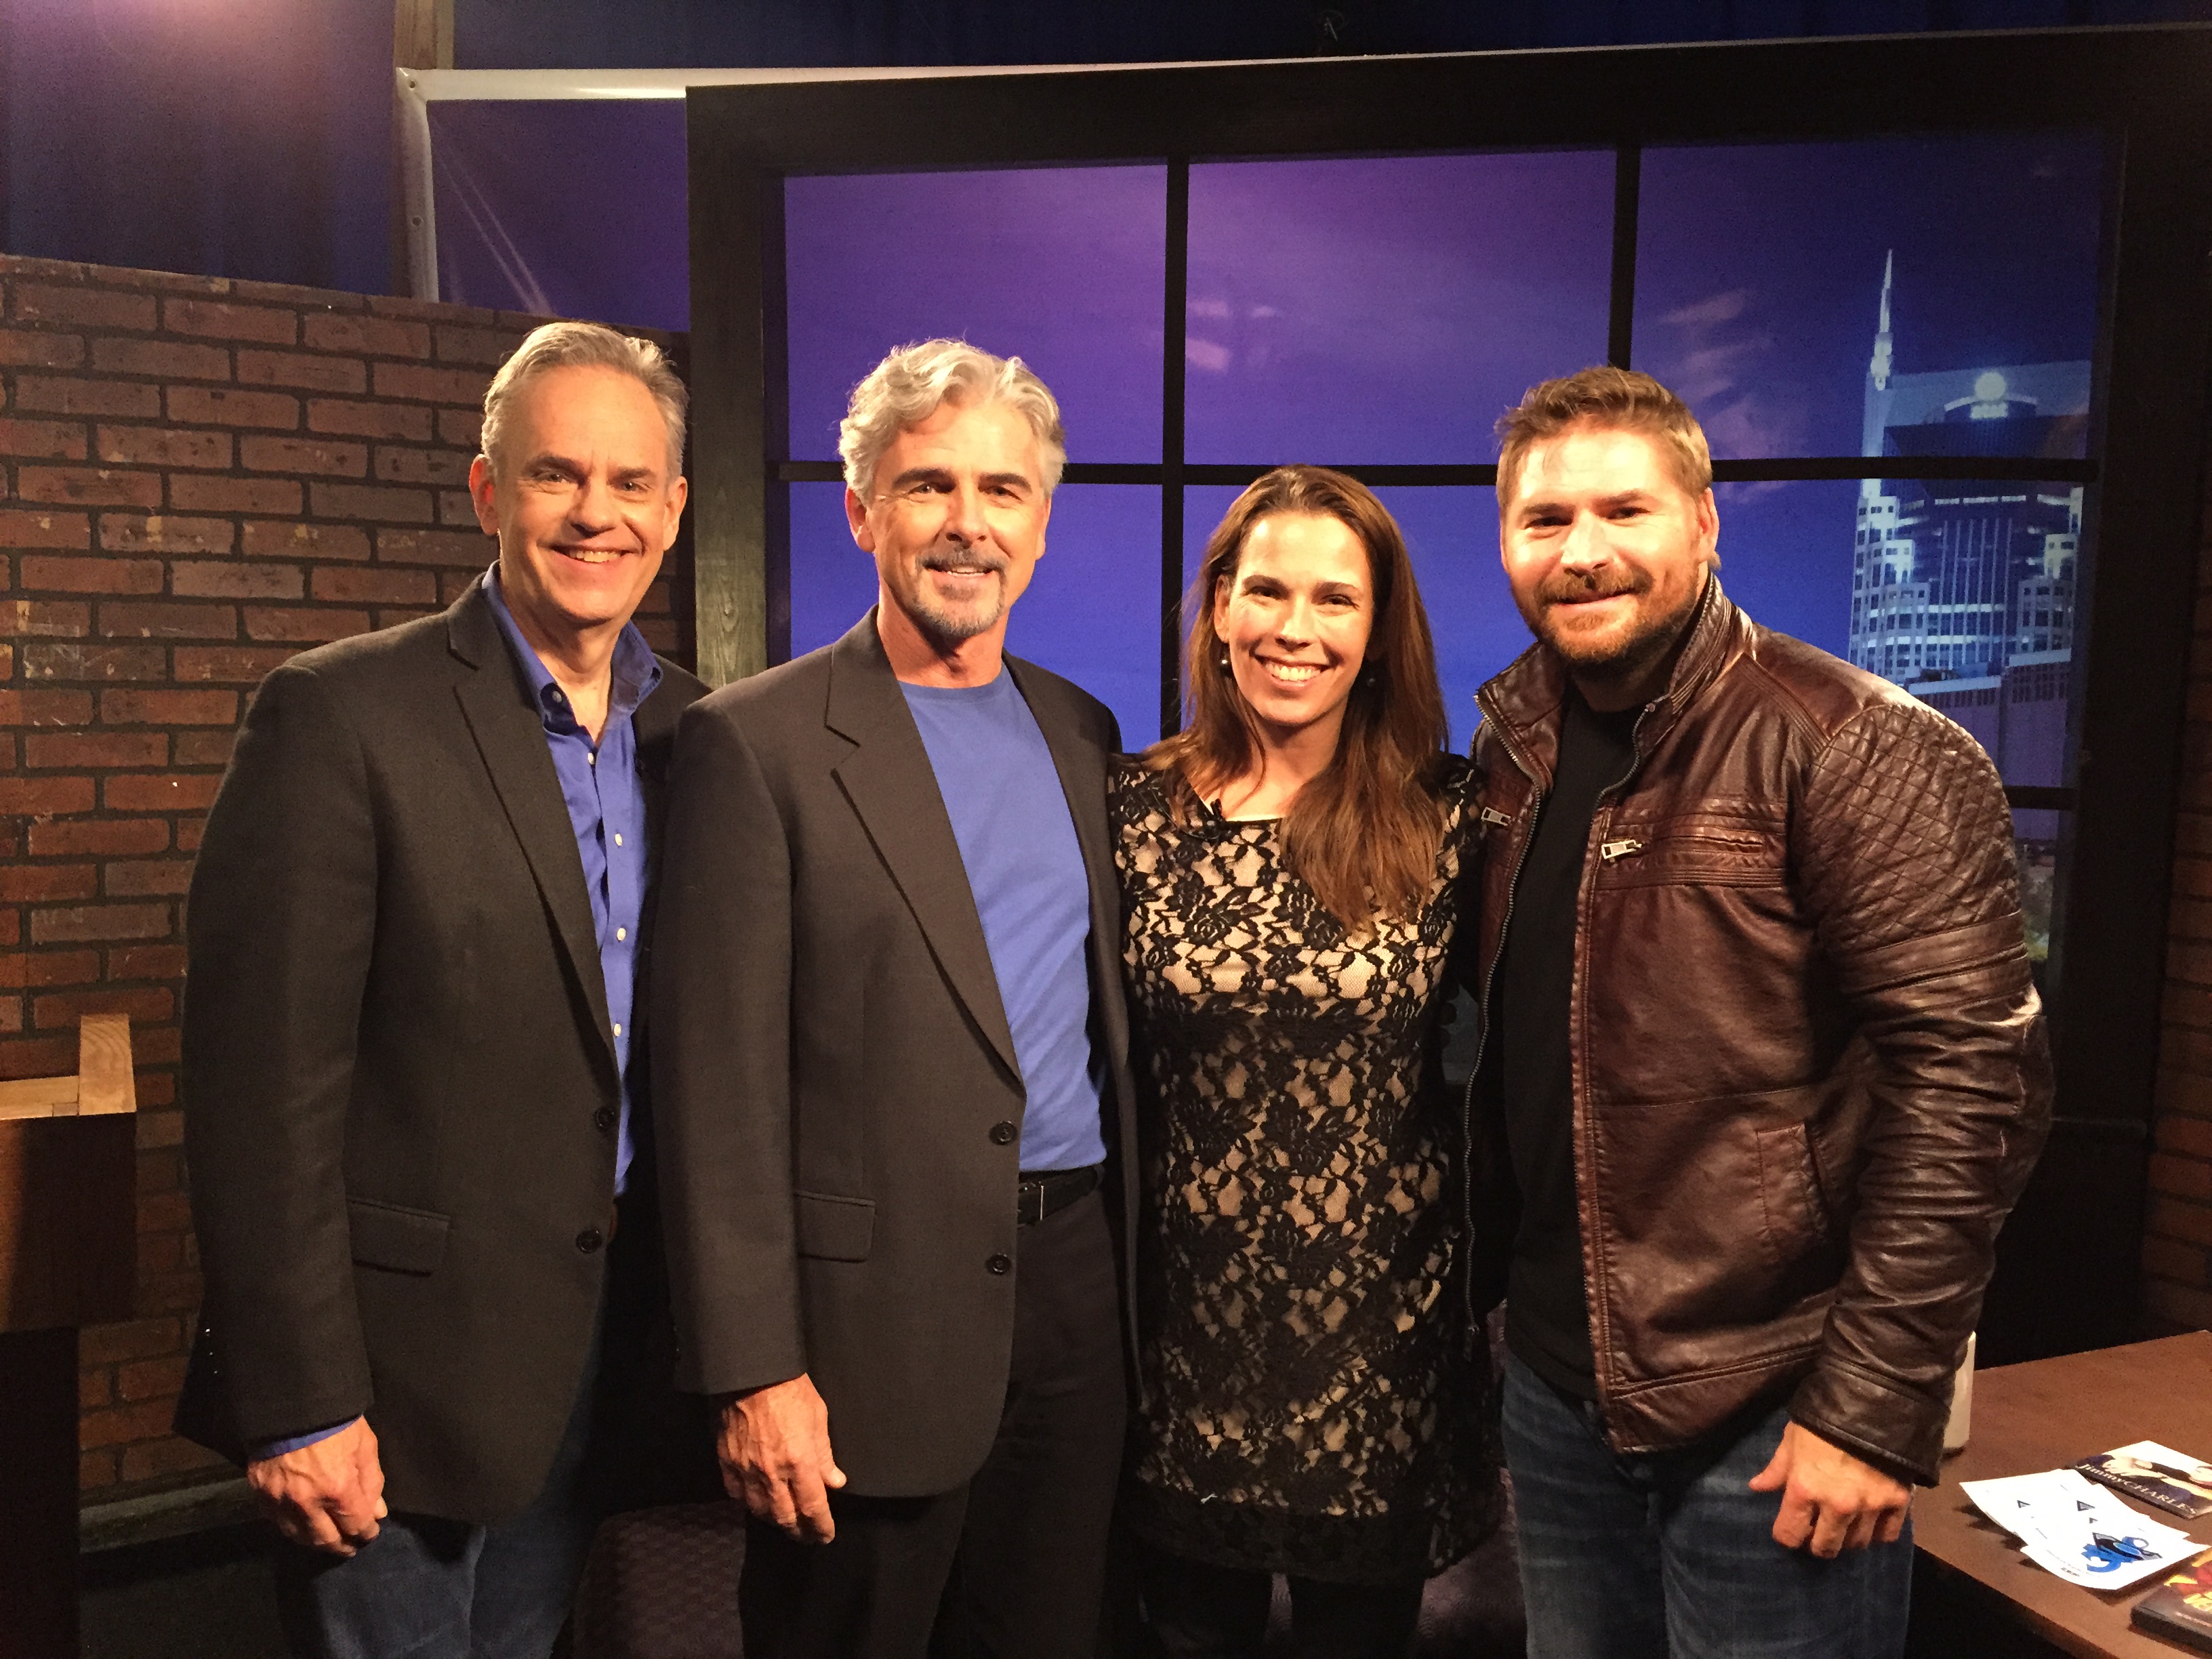 MUSIC CITY CORNER season 2 episode 3, with host Bob Daniel, actor Thom Booten and musician Jimmy Charles.